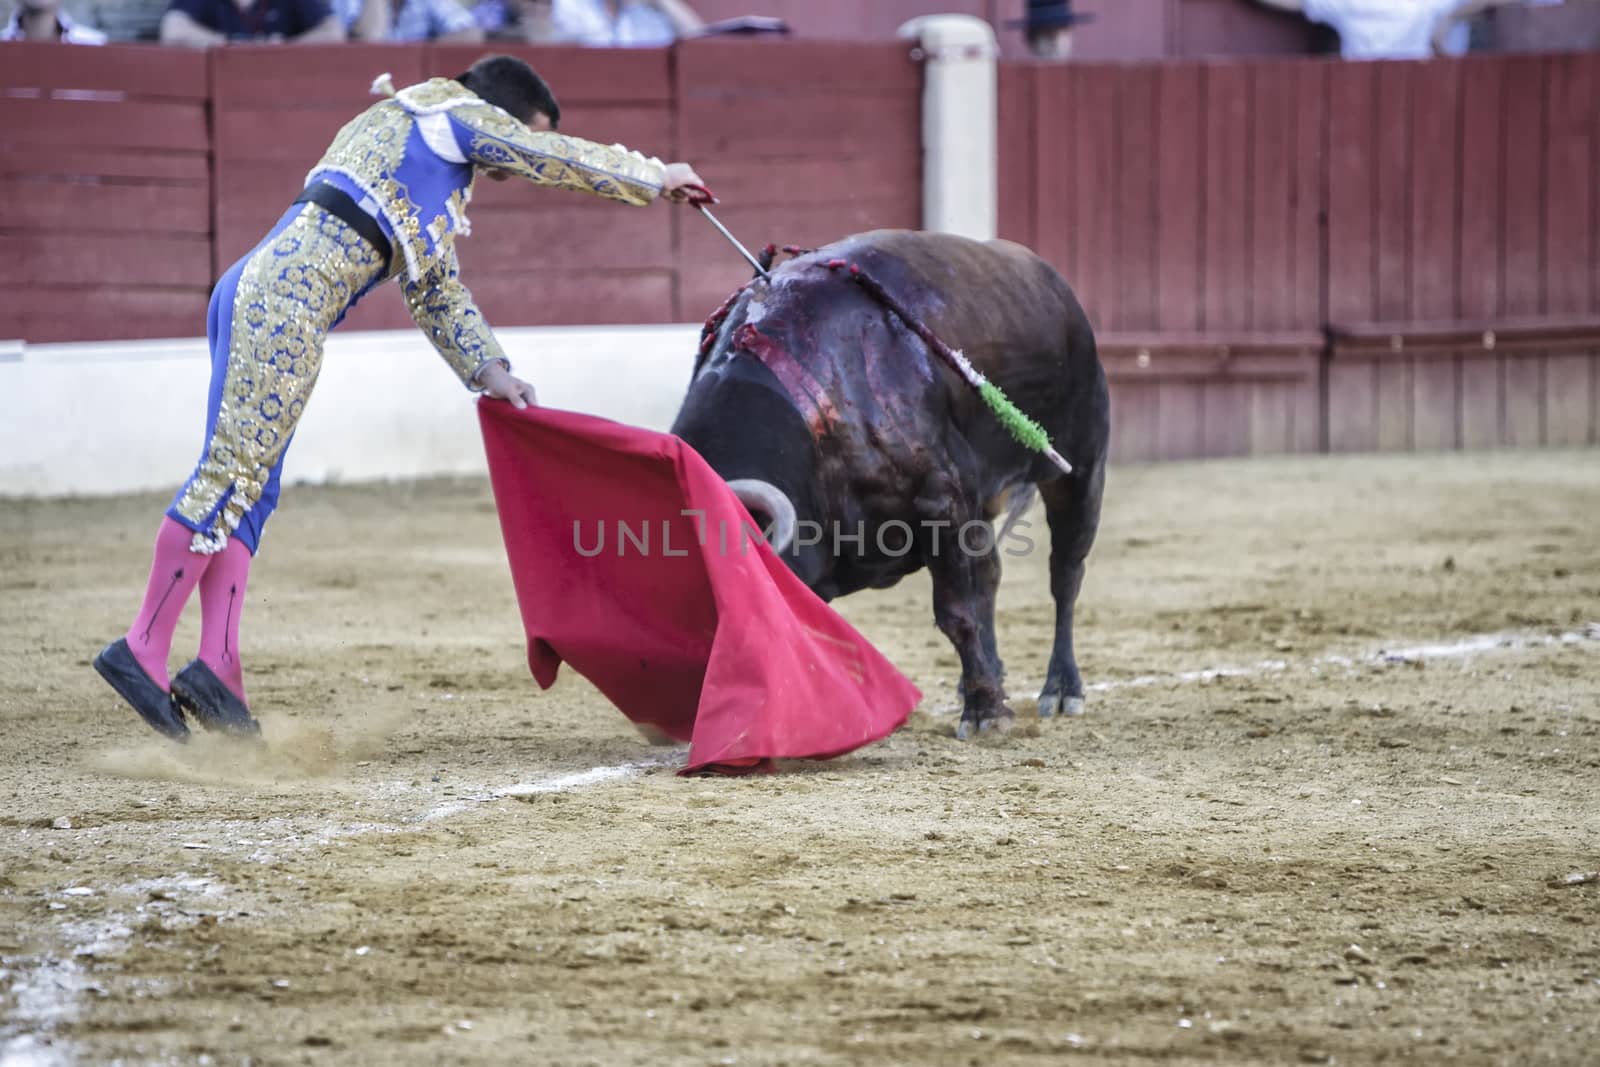 Baeza, Jaen province, SPAIN - 15 august 2009: Bullfighter Julian Lopez El Juli stabbing the bull with the sword giving a jump cheating the bull in the Bullring of Baeza, Jaen province, Andalusia, Spain